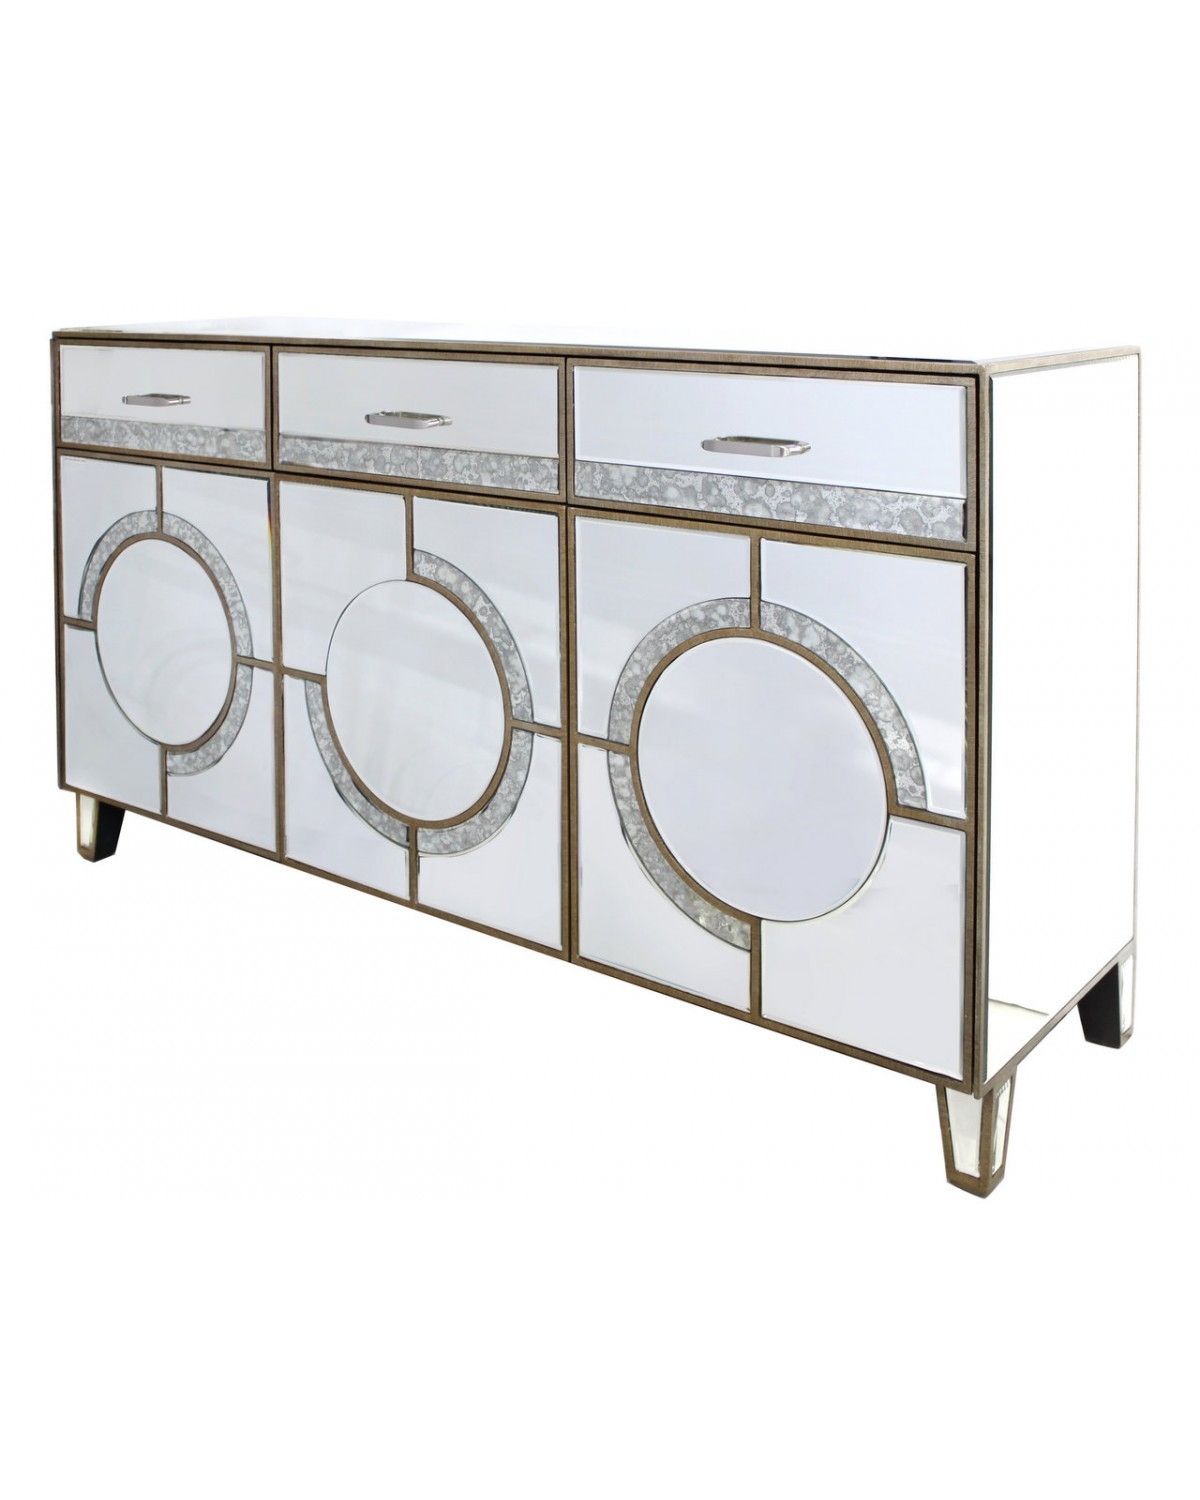 Gatsby Antique Mirror Sideboard | Cimc Home Inside Diamond Circle Sideboards (View 3 of 30)